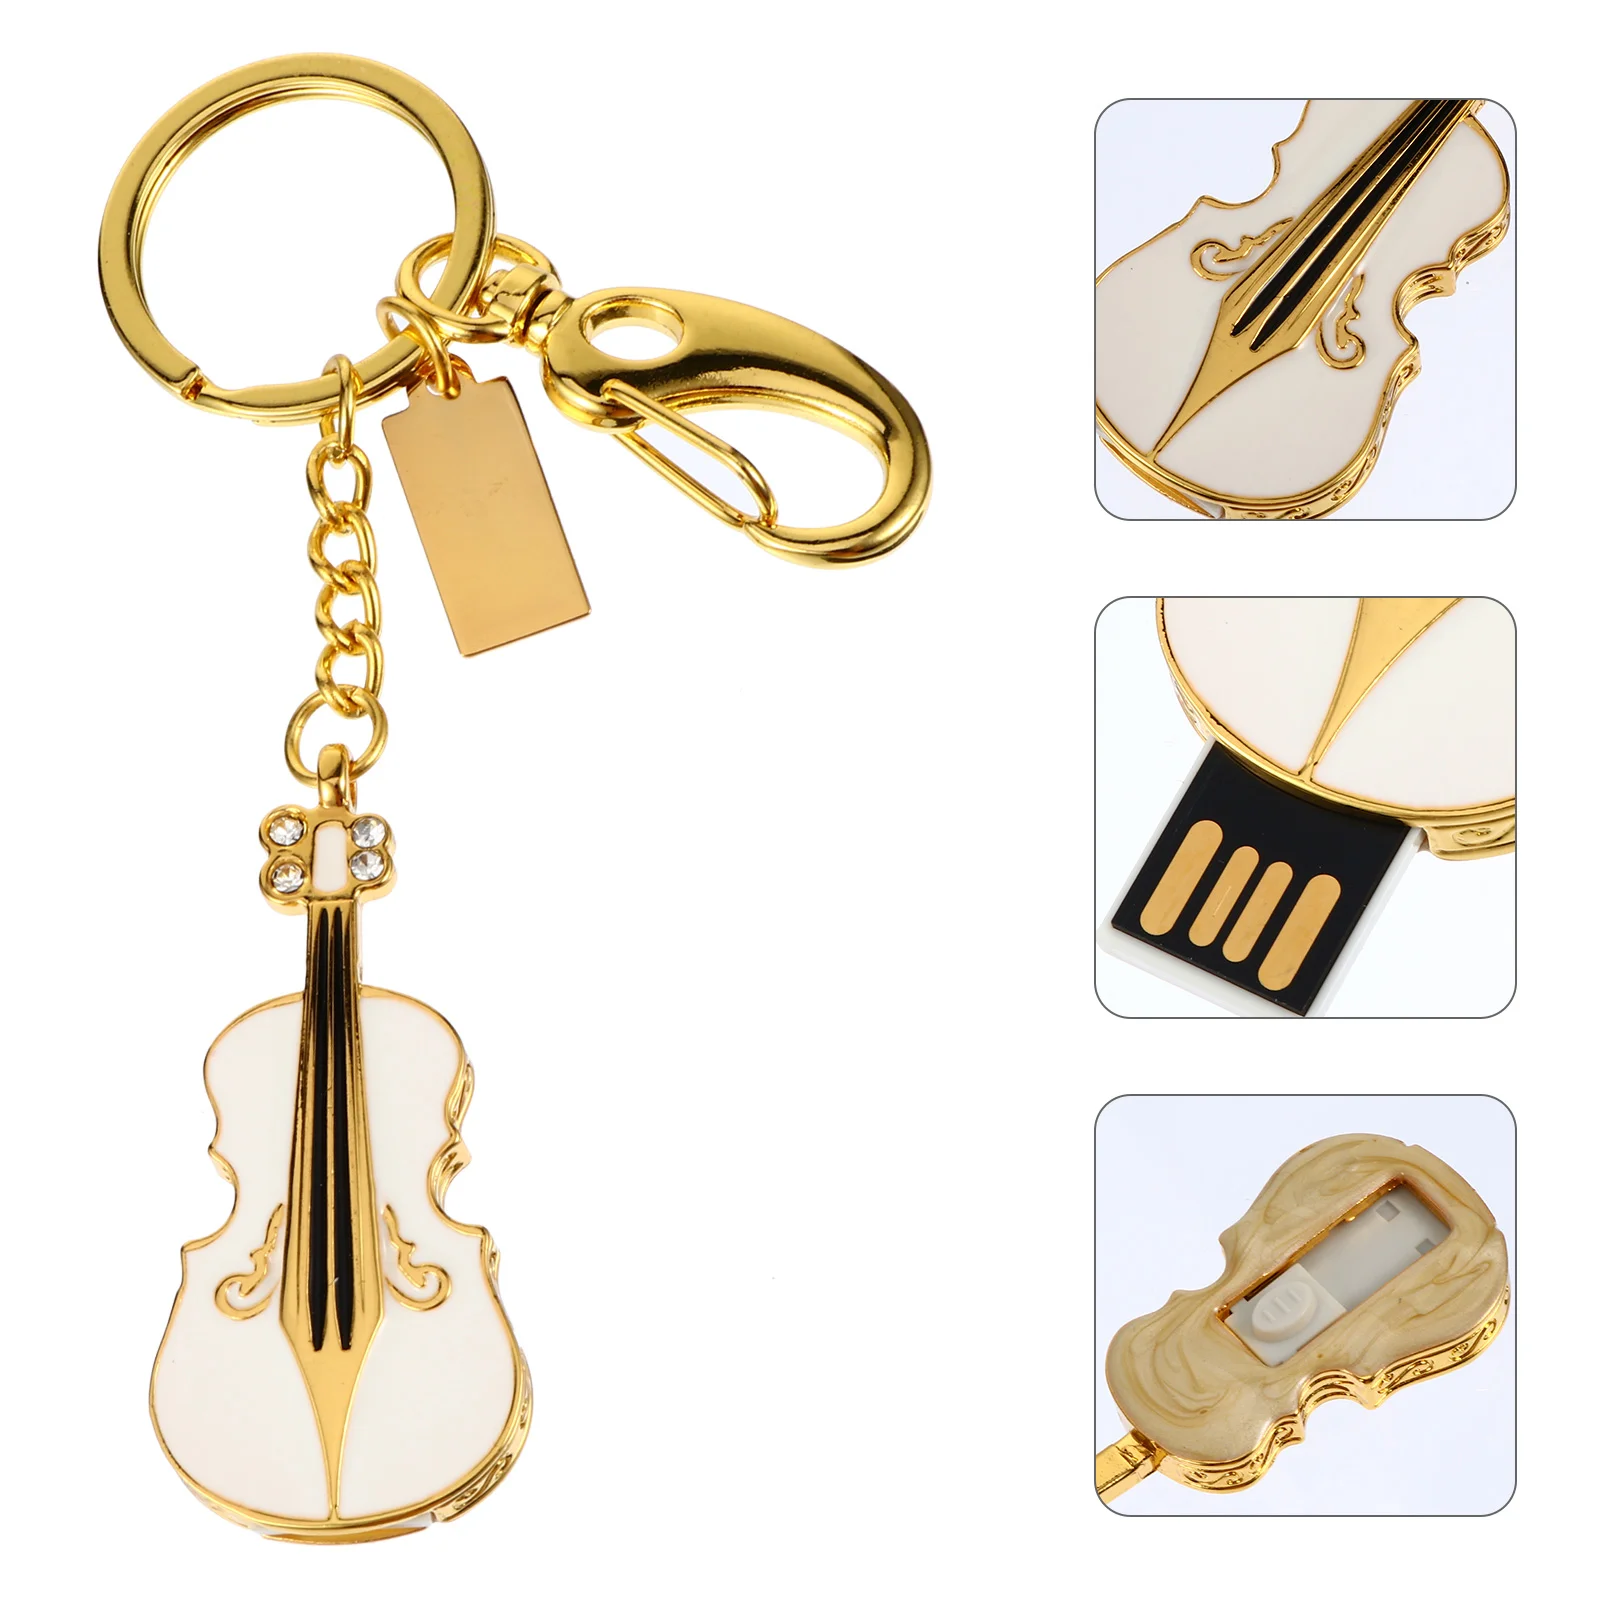 

Usb Drive Flash Guitar Keychain Disk U Instrument Stick Gold Thumb Drives Musical Memory Metal Novelty Pendrive 32G Purse Charms